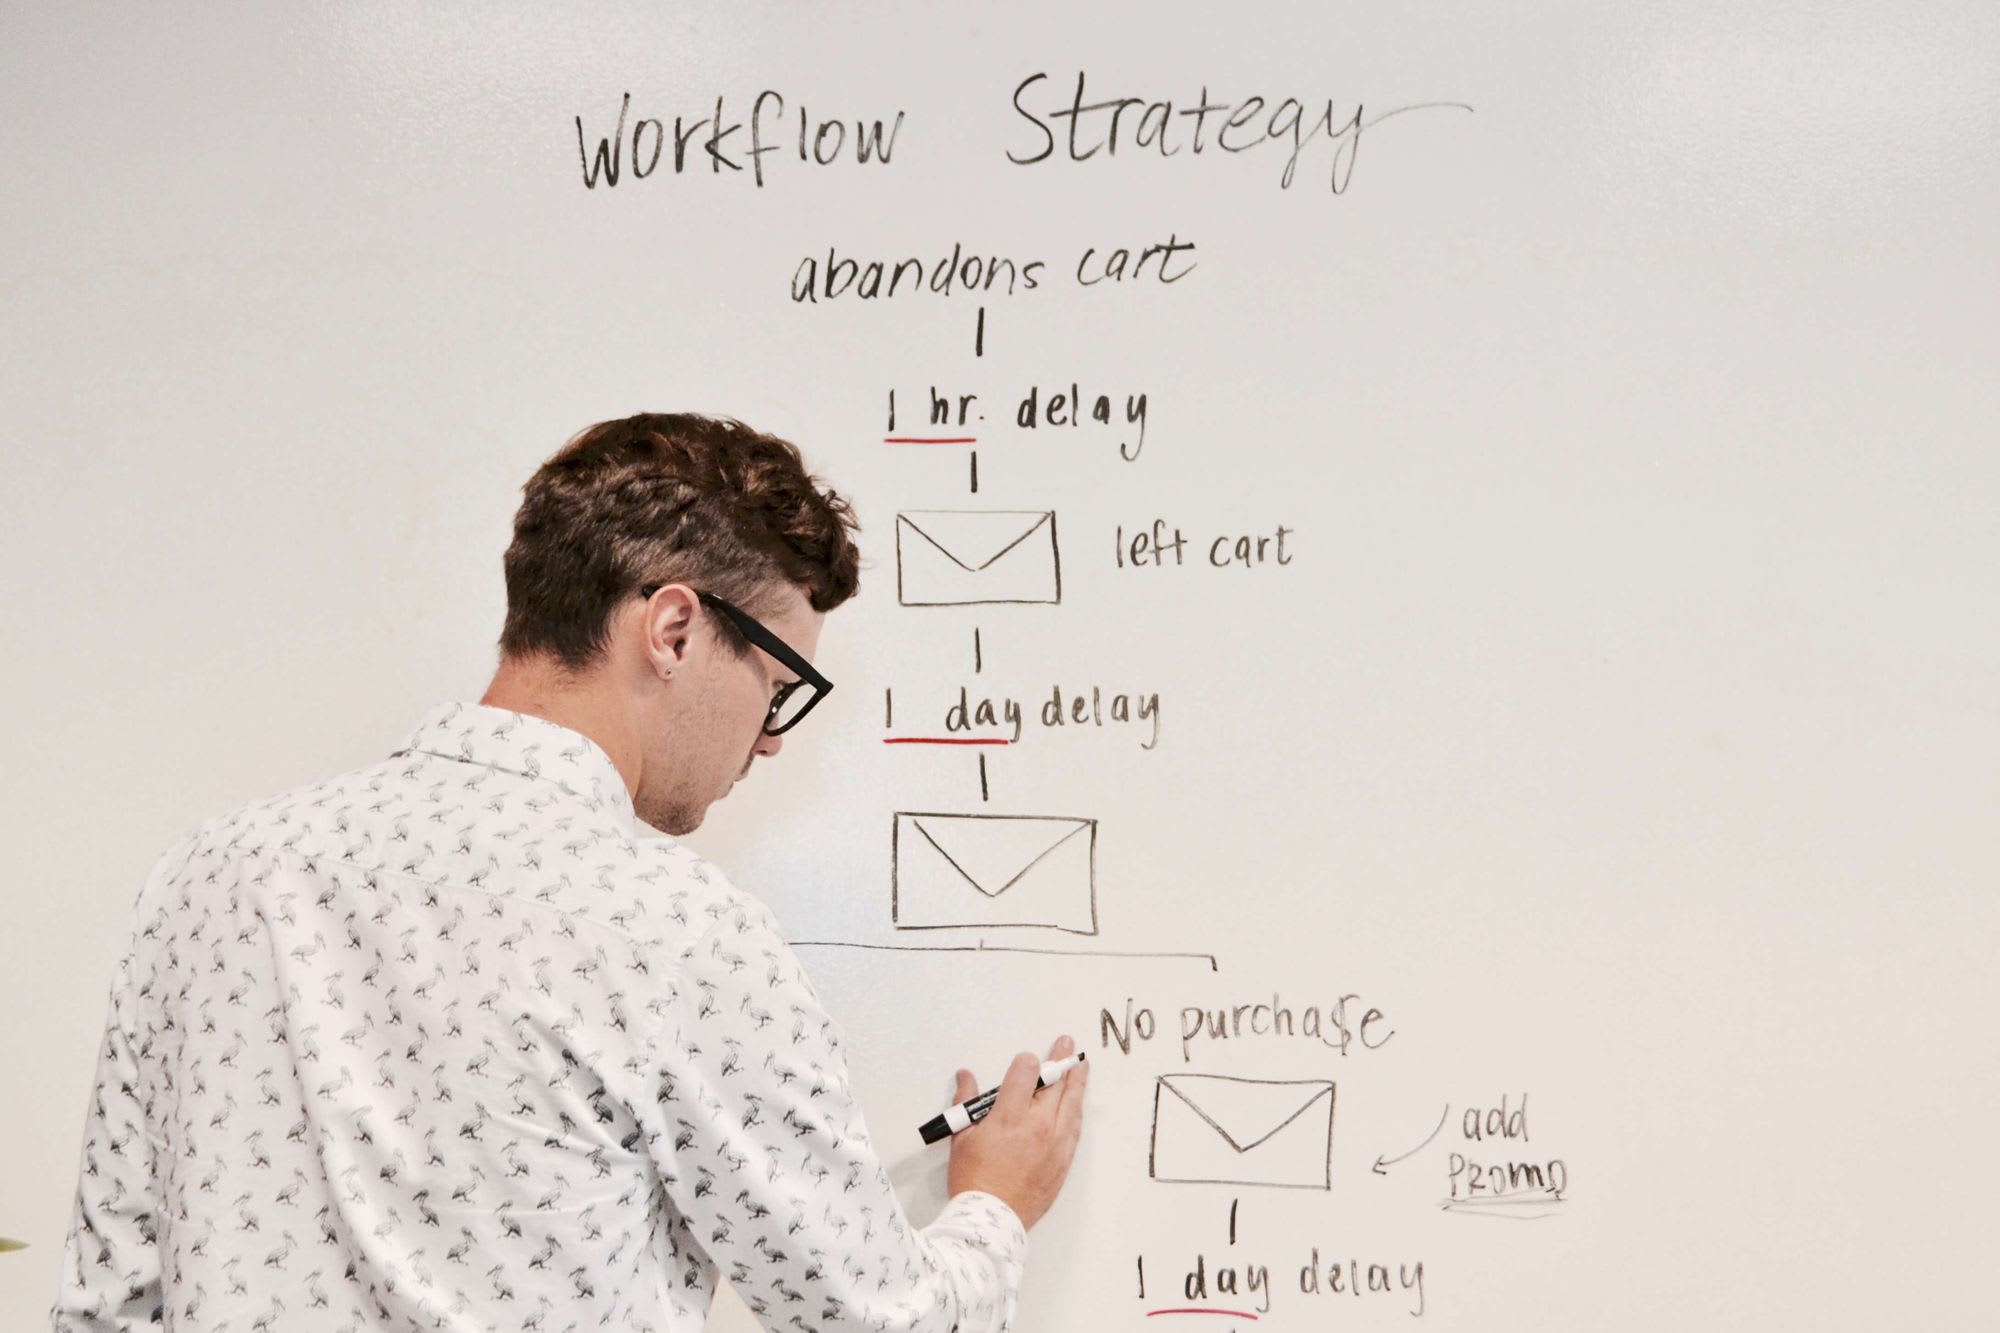 Man writing a workflow on a whiteboard